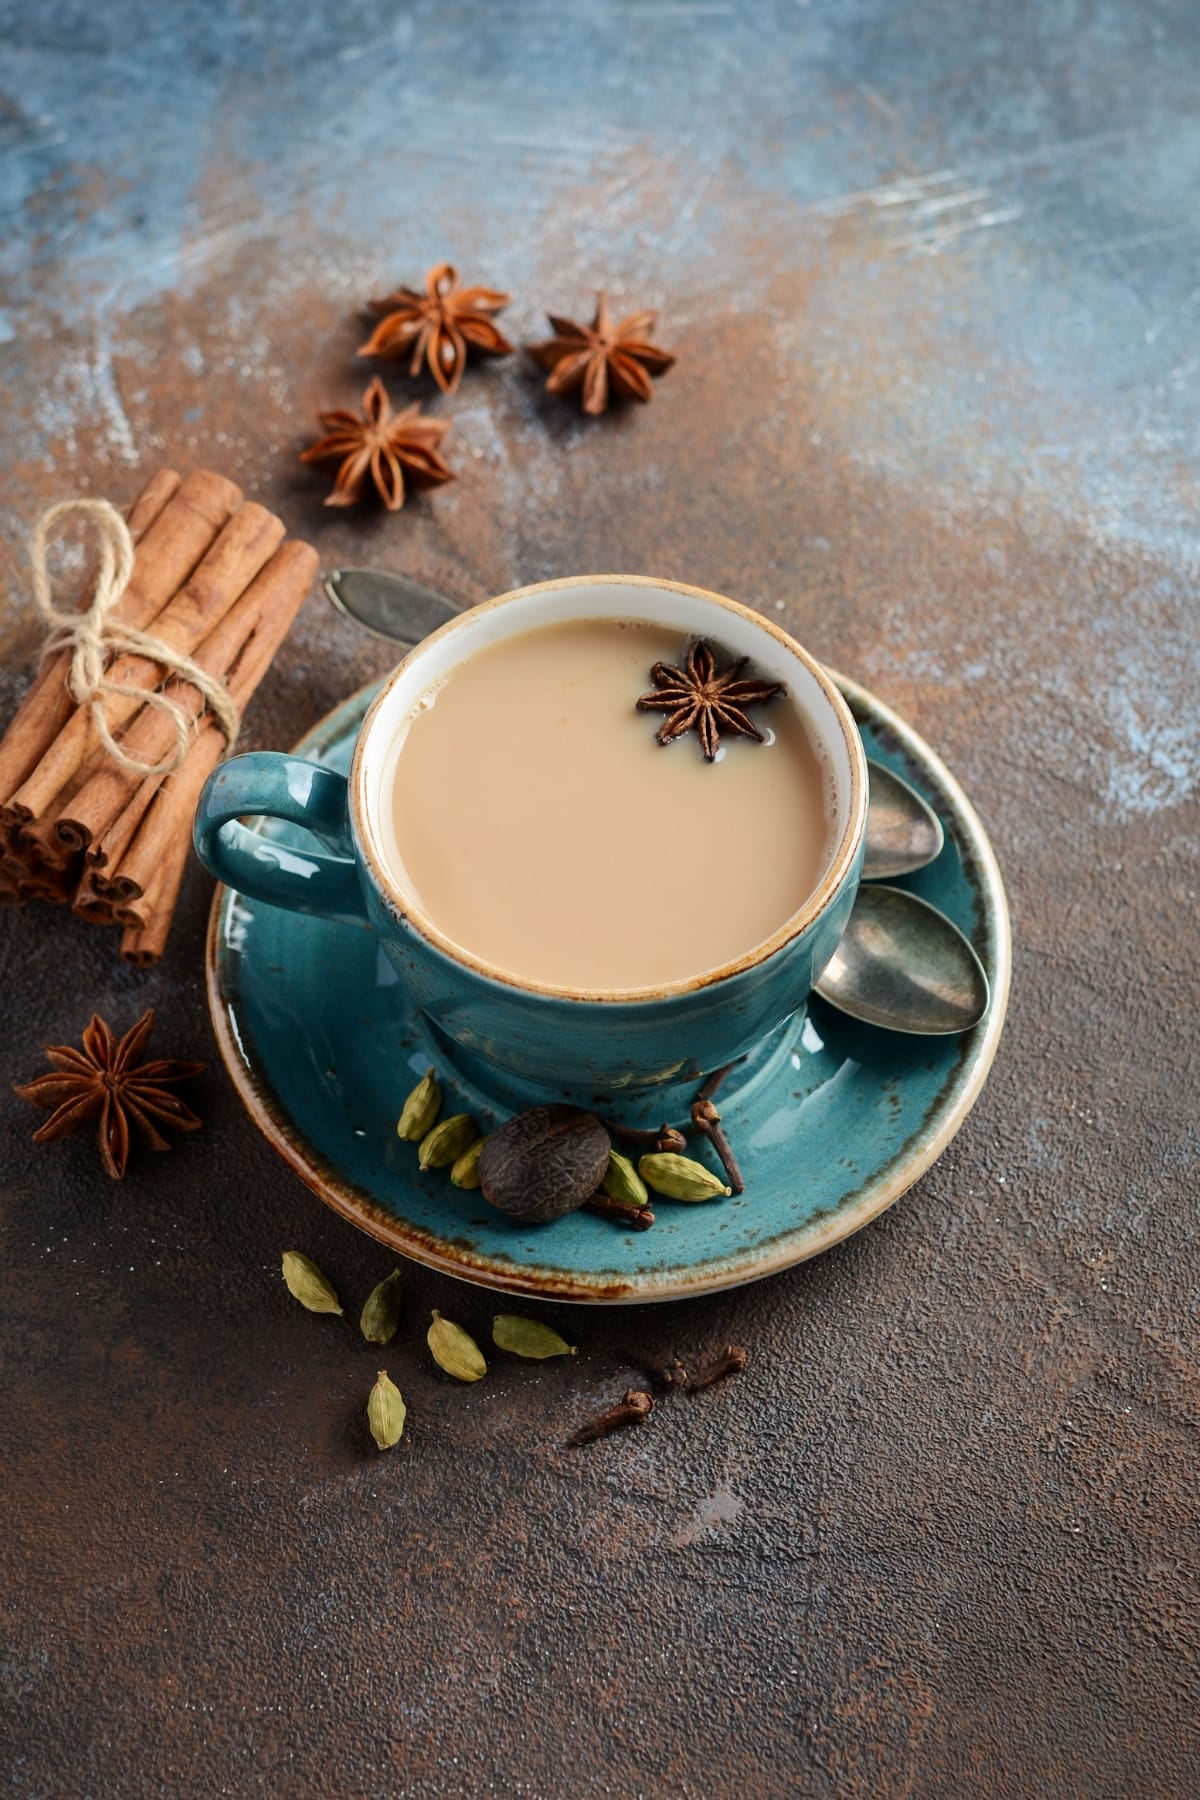 Hot Chai Tea with Cinnamon in a Blue Cup